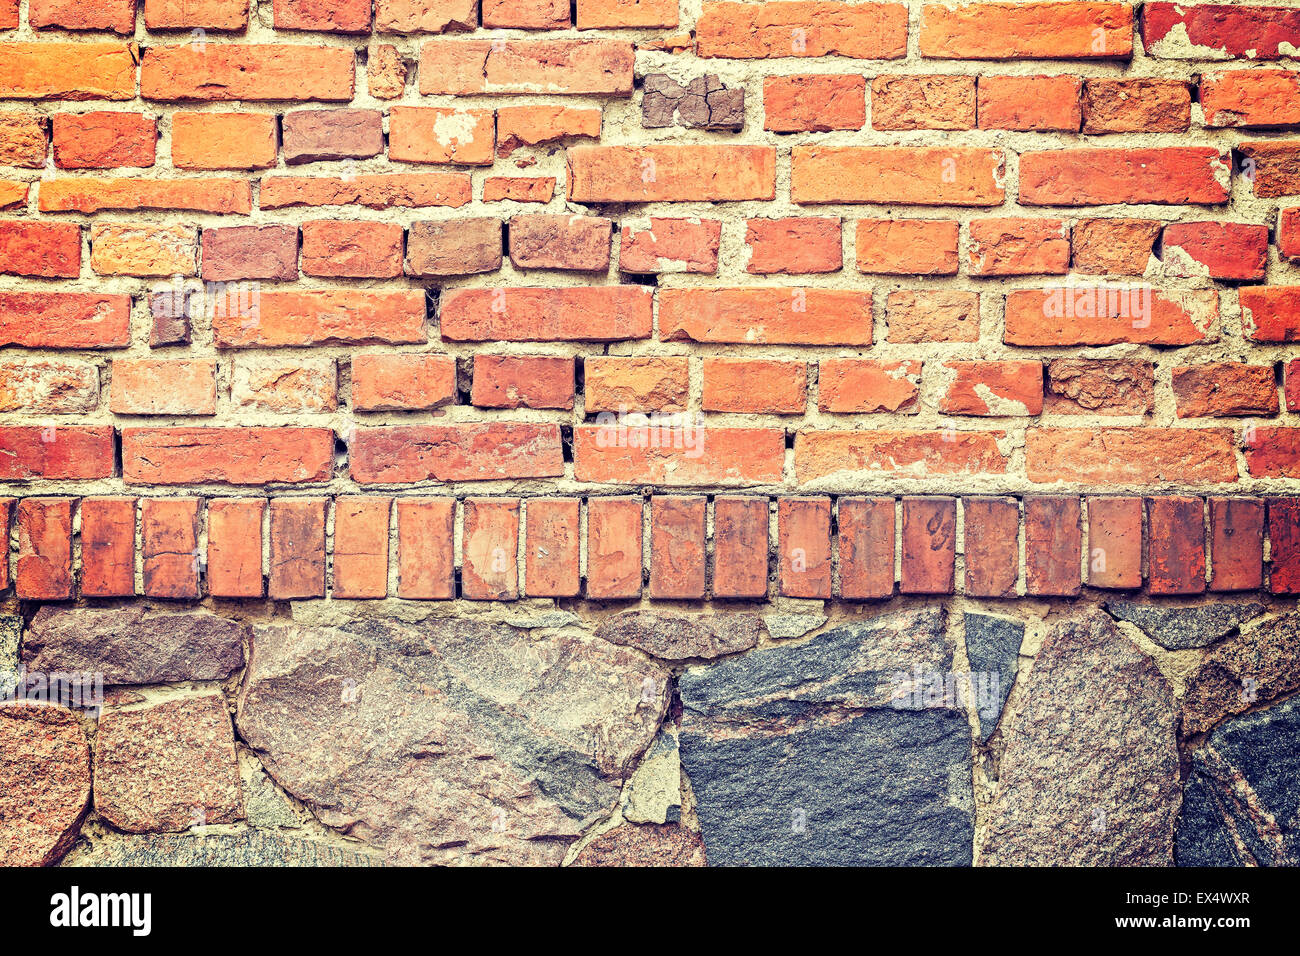 Brick and stone wall background or texture. Stock Photo